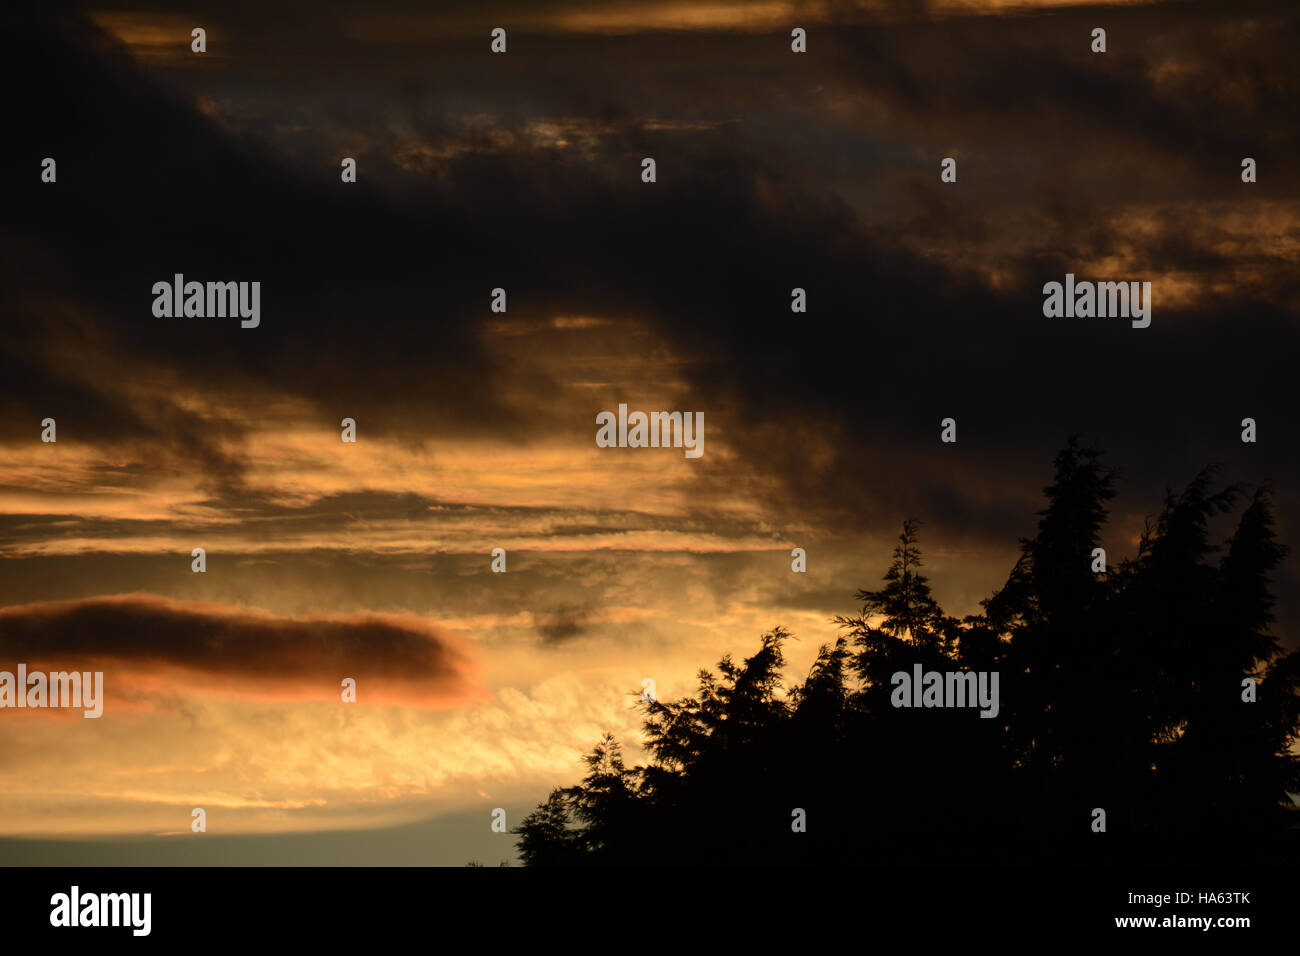 Dramatic sunset, clouds black and orange, silhouette of trees in foreground Stock Photo